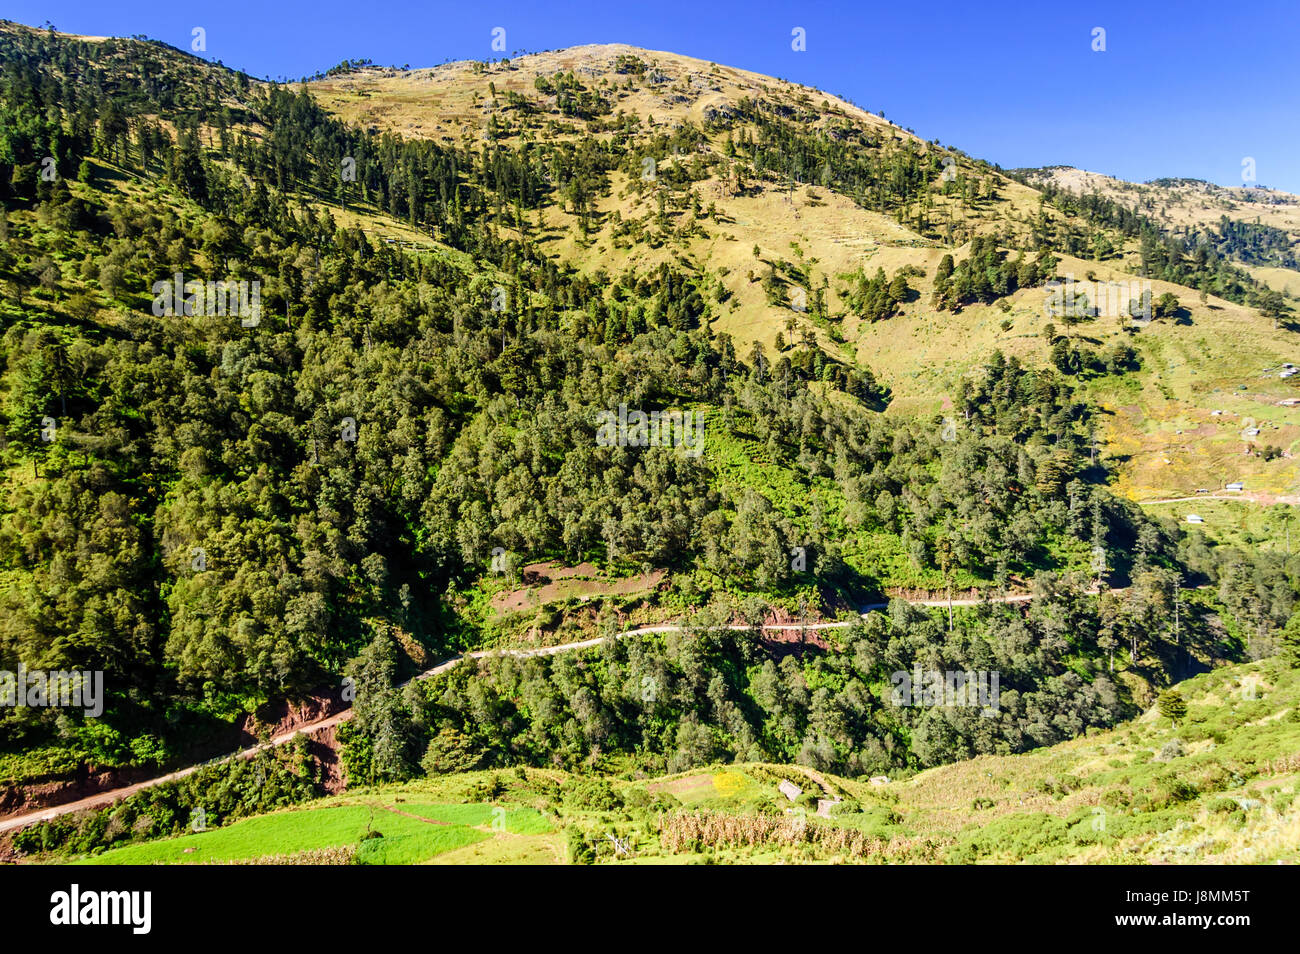 Road winds through forested hills in highlands of Huehuetenango, Guatemala, Central America Stock Photo